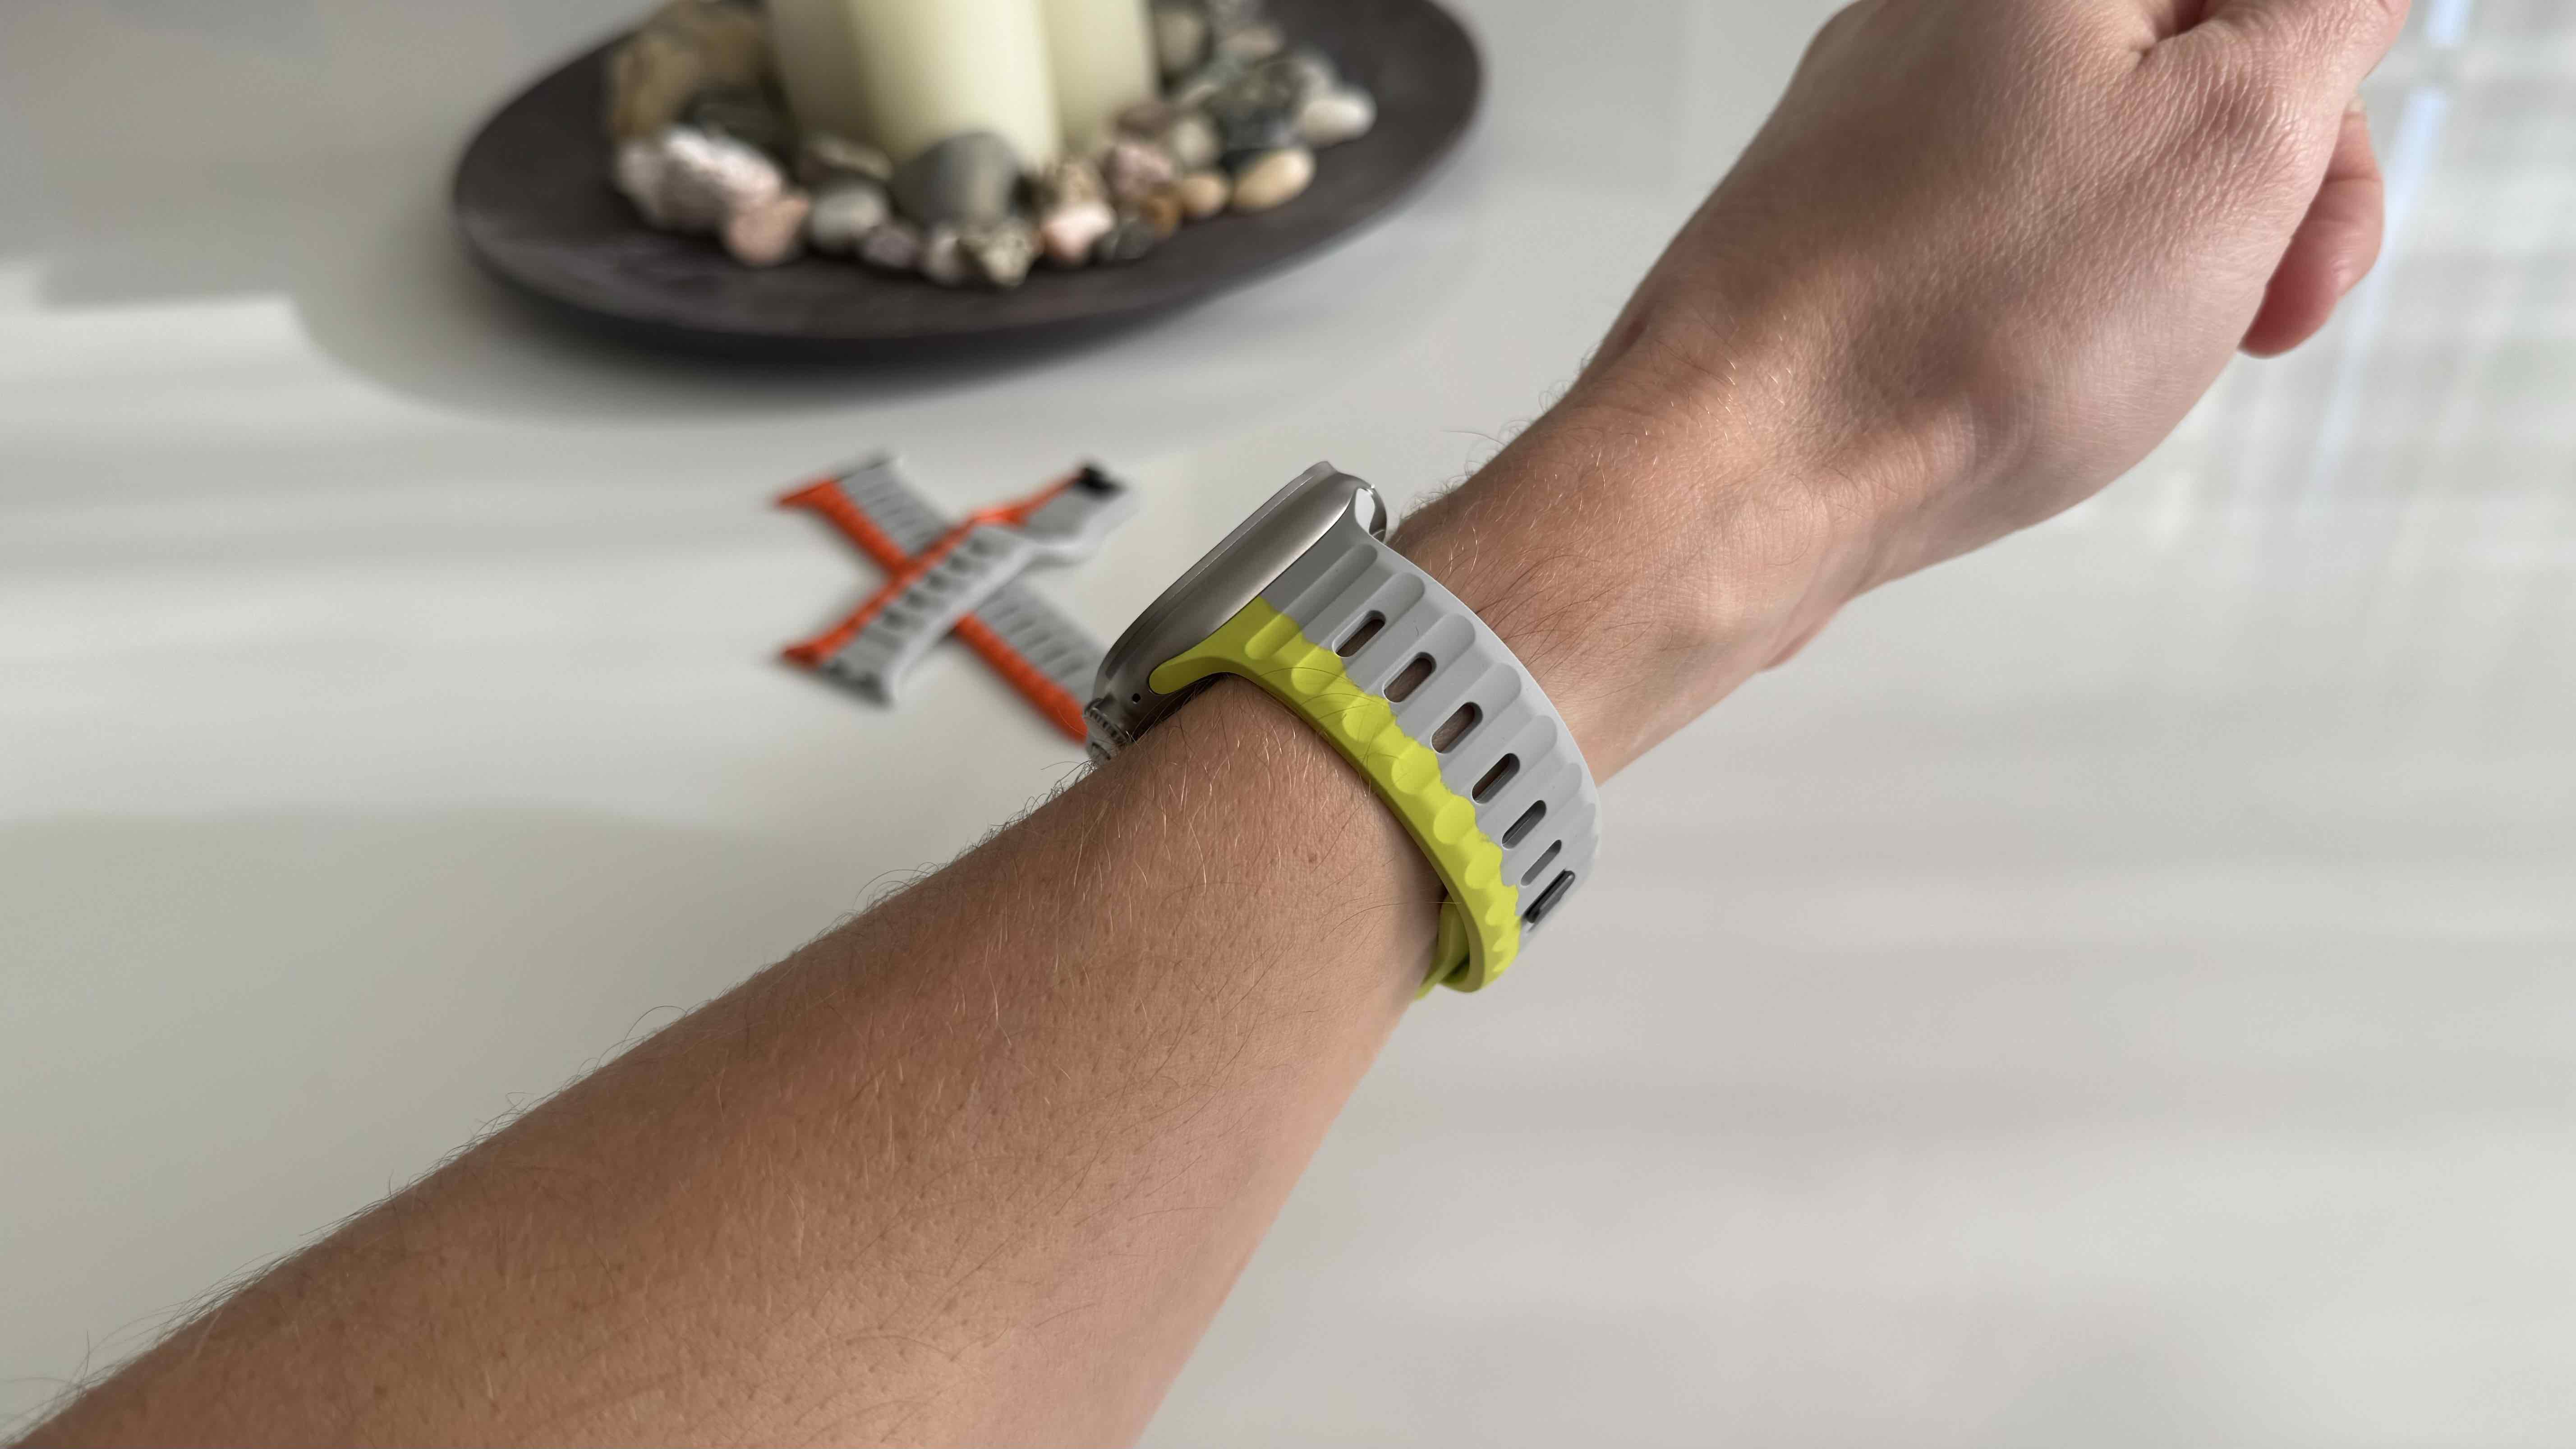 Grab the new limited edition Nomad Strike Sport Apple Watch band